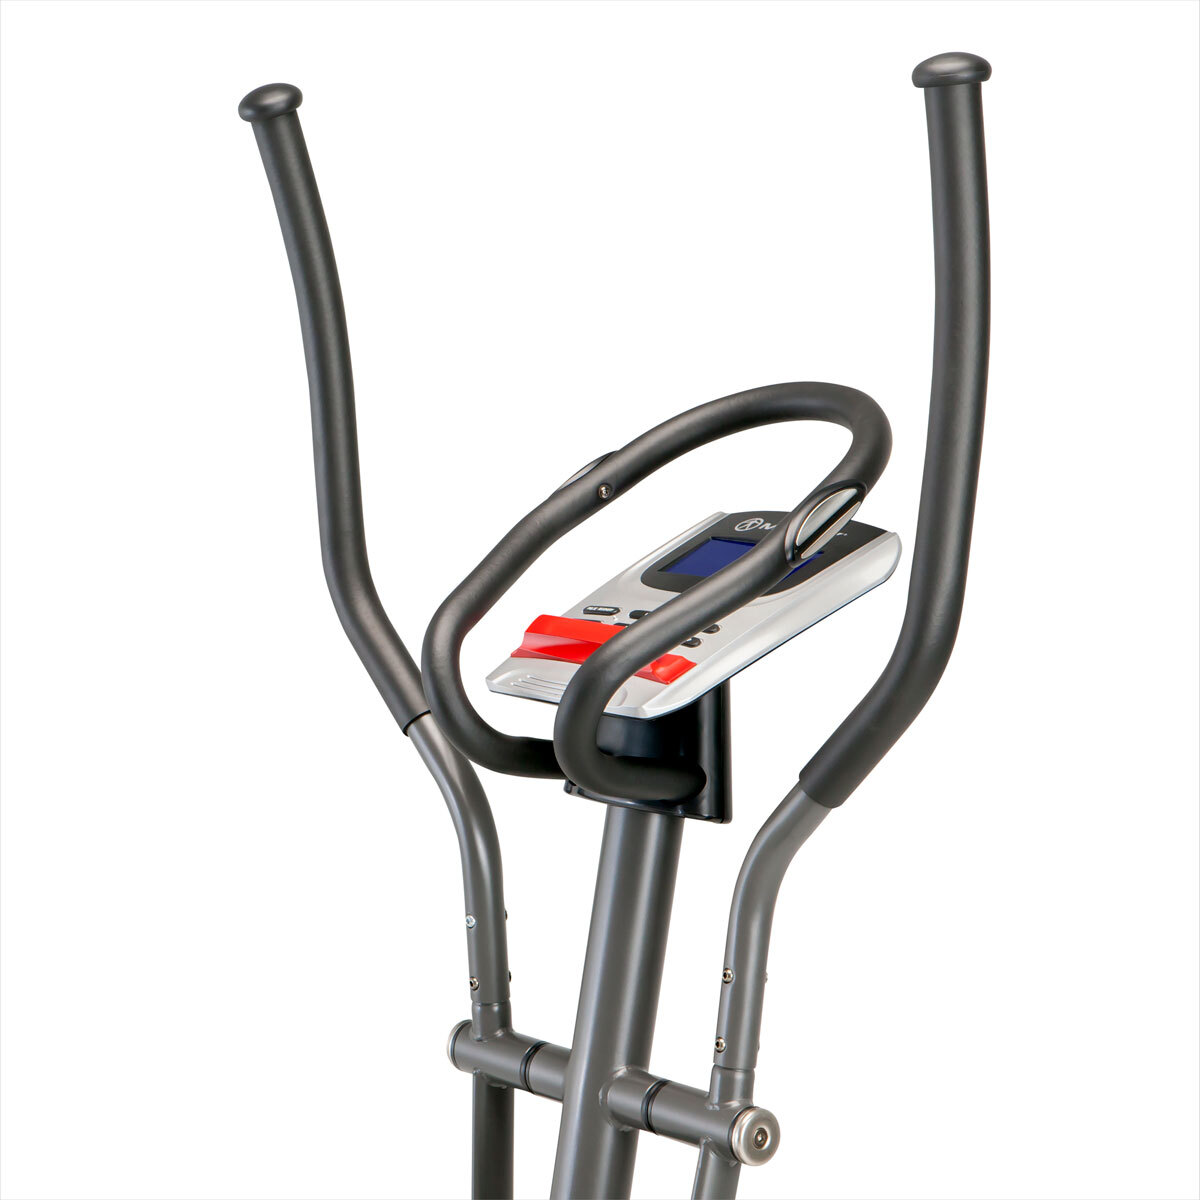 Marcy ME-704 Self generating cross trainer